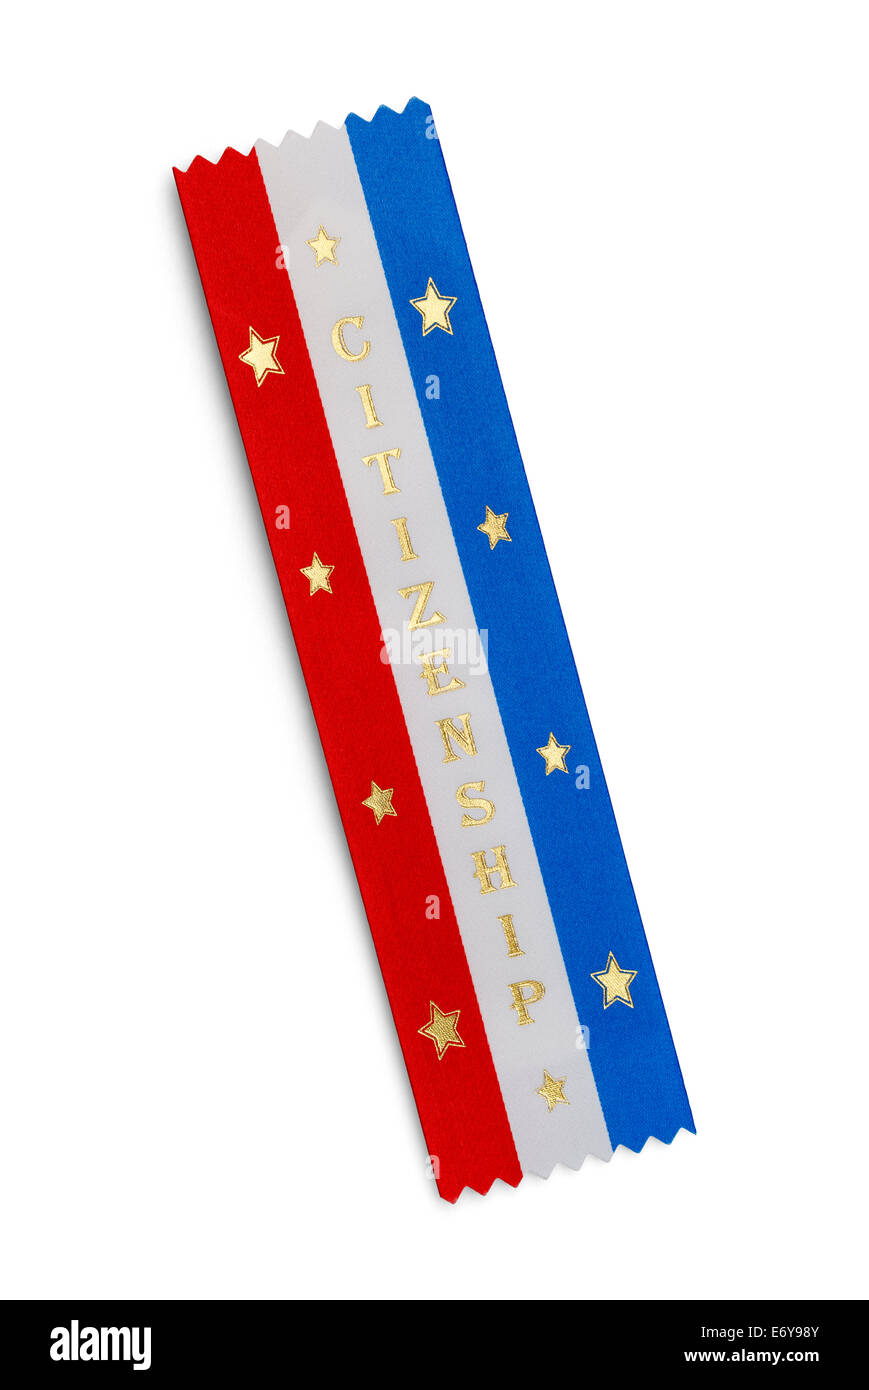 Red White and Blue Citizenship Ribbon With Stars Isolated on White Background. Stock Photo